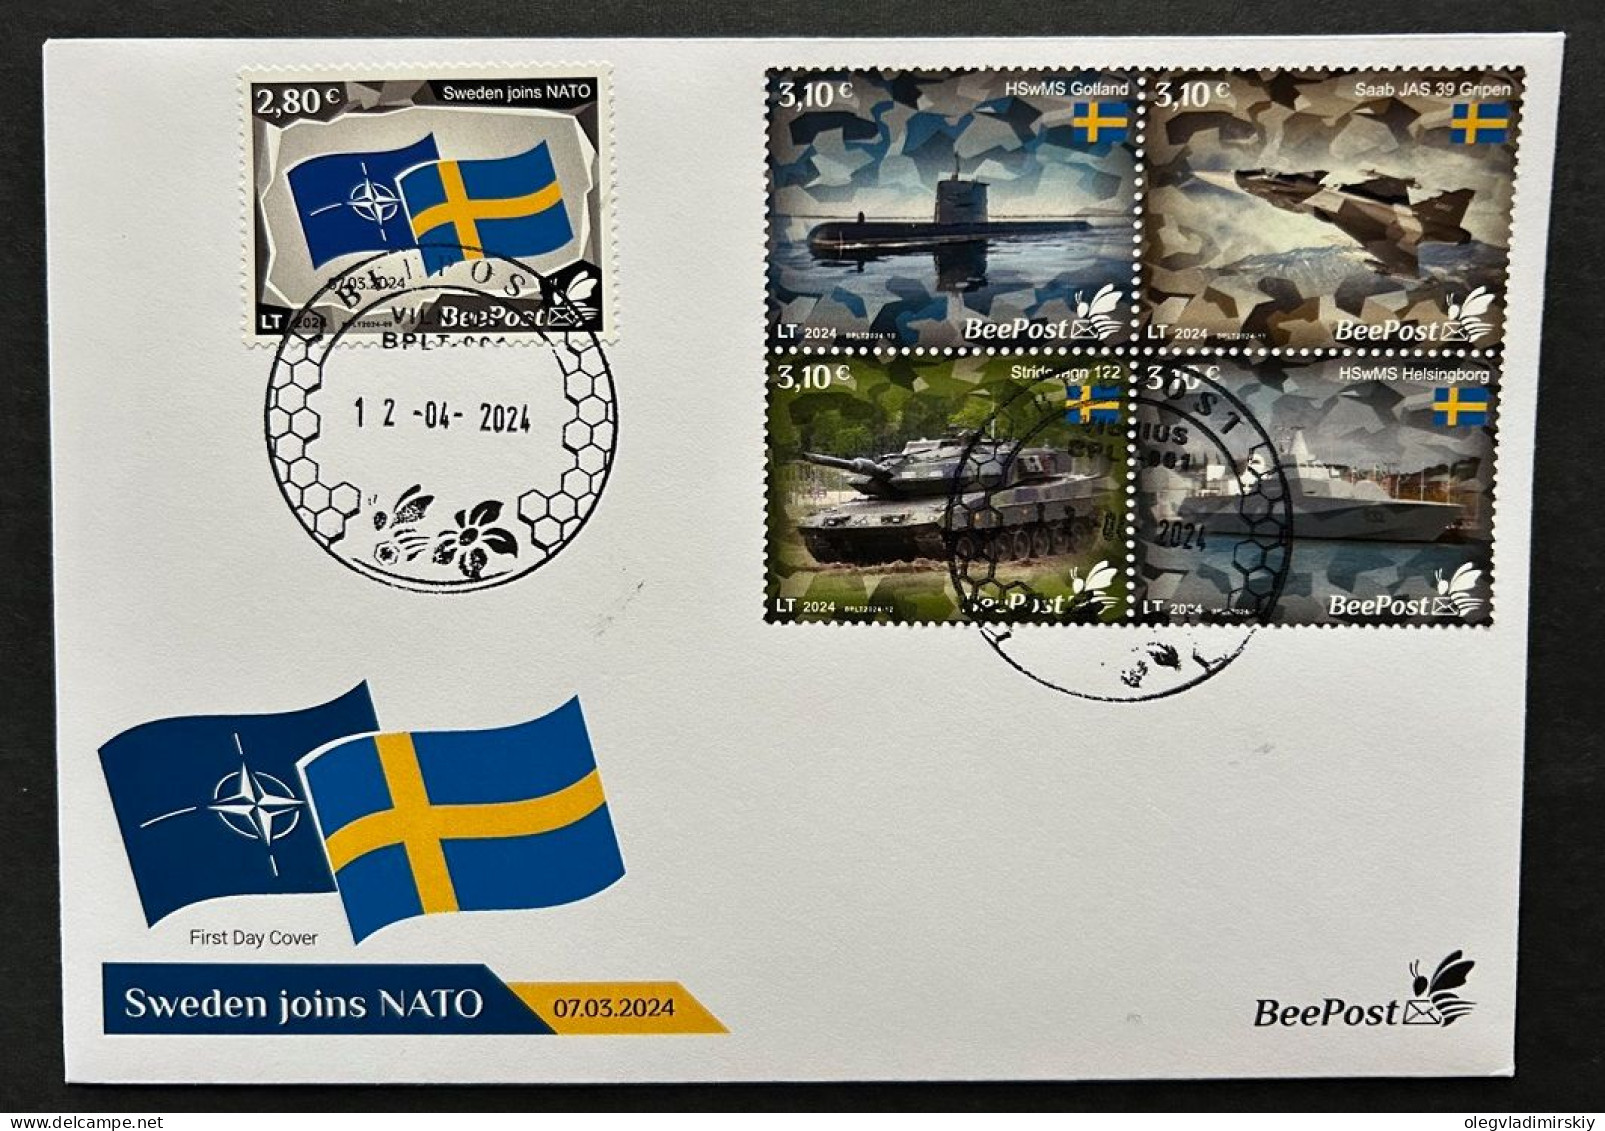 Lithuania 2024 Baltic - NATO Sea Sweden Joins NATO Tank Submarine Warship Airplane Flags BeePost Set Of 5 Stamps FDC - Submarinos